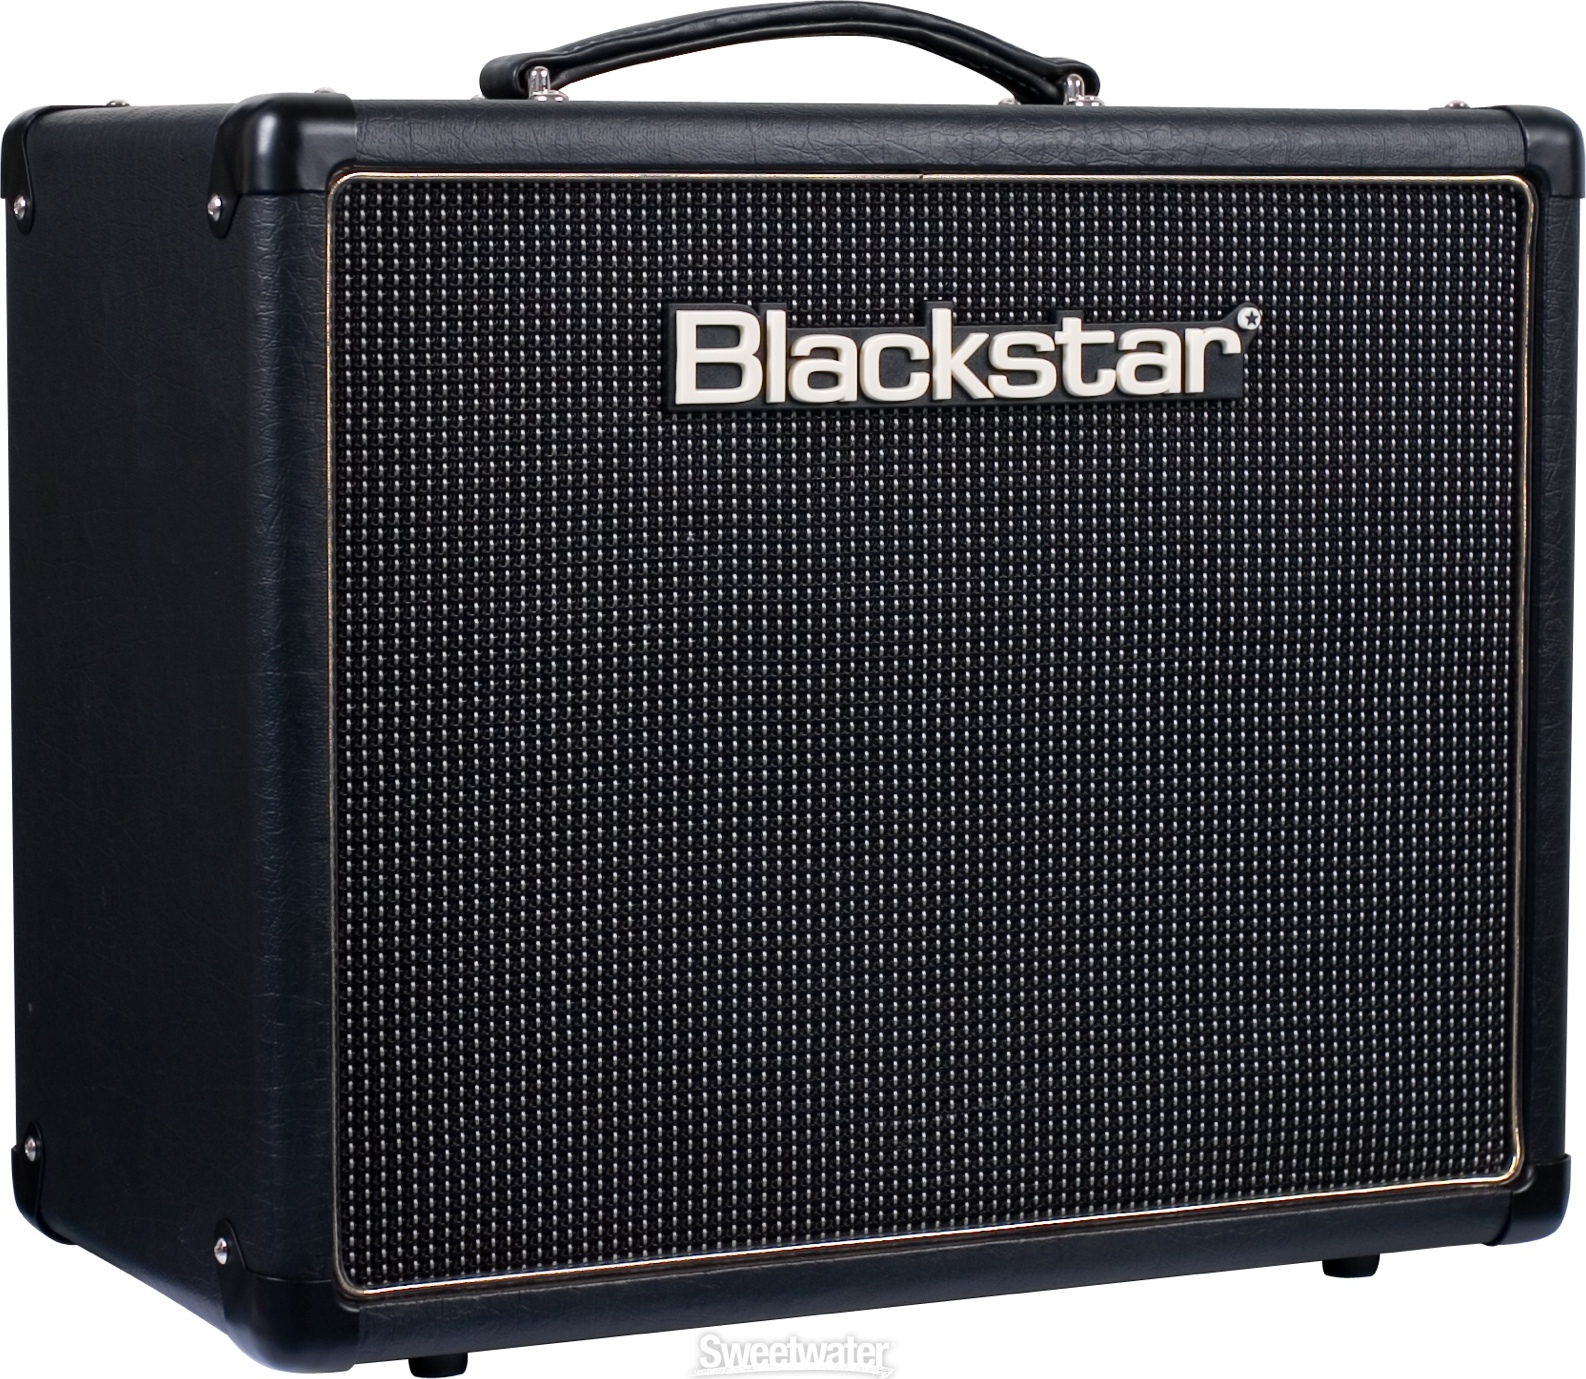 Blackstar Ht-5r 5 W 1x12 - Electric guitar combo amp - Main picture